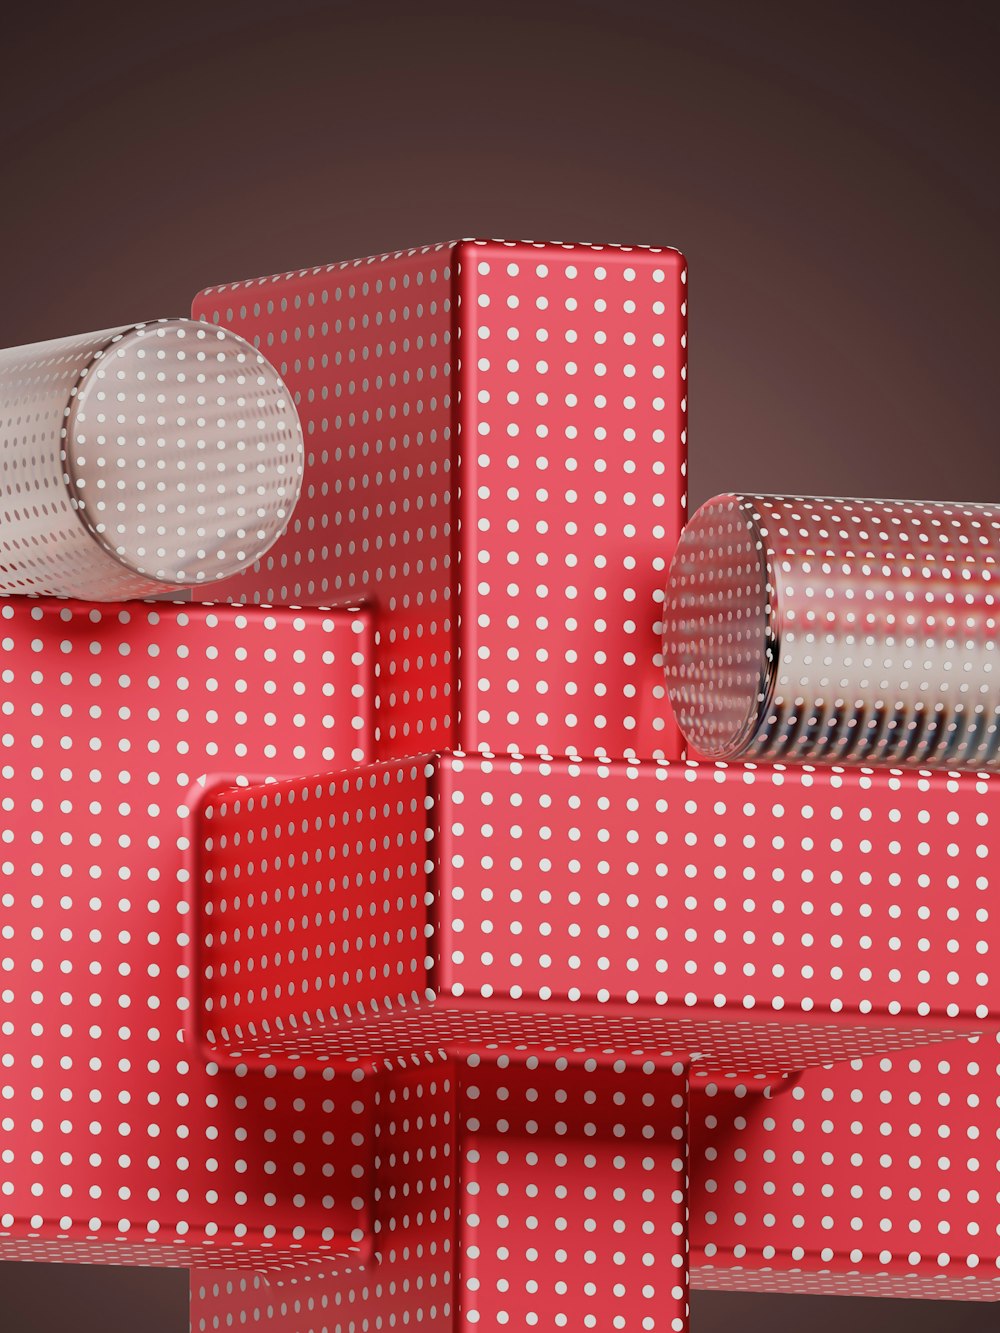 a stack of red and white boxes with polka dots